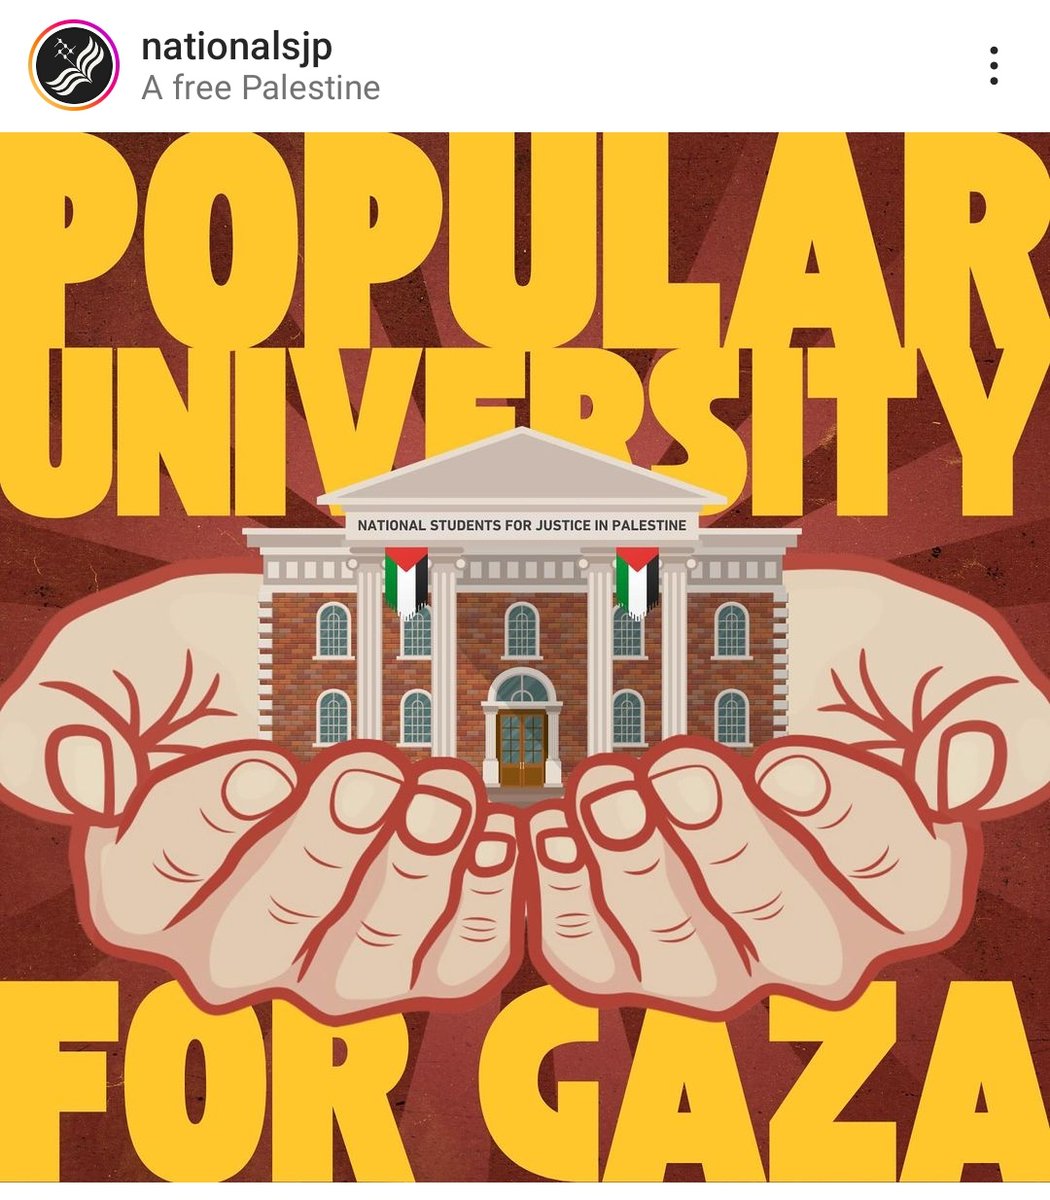 BREAKING: The national organization of 'Students for Justice in Palestine' just announced that they are replicating Columbia University's 'Gaza Solidarity Encampment' across the country and will start occupying campus grounds. Official statement: 'Universities have chosen